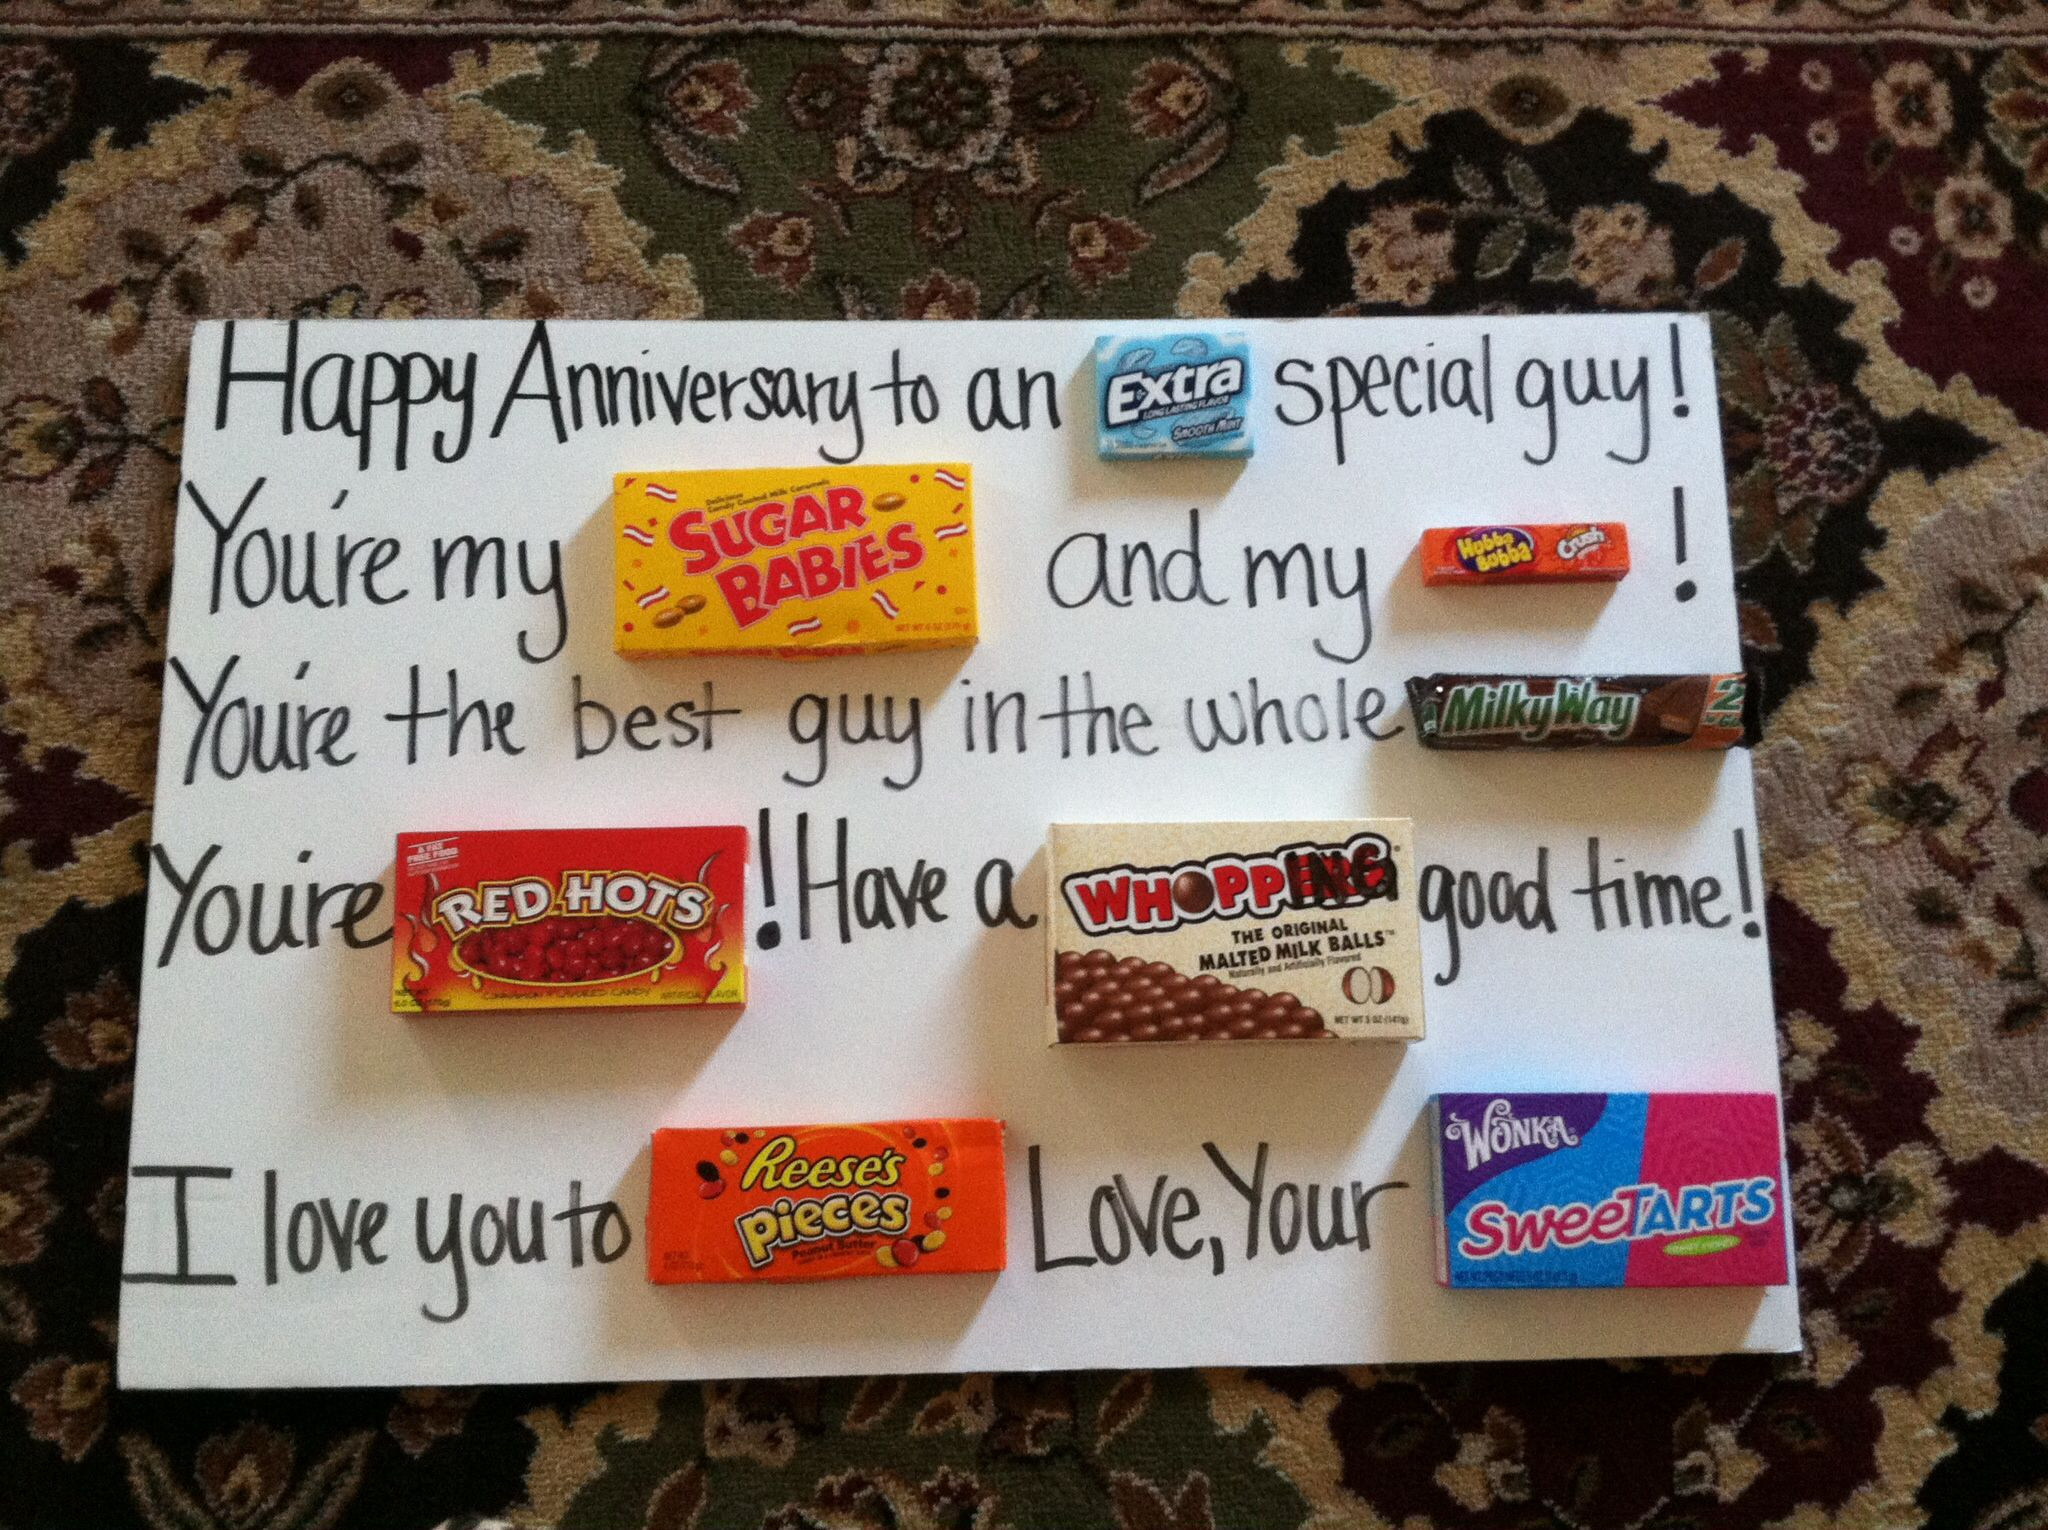 Candy Gift Ideas For Boyfriend
 Another great candy idea for a sugar ant like my boyfriend